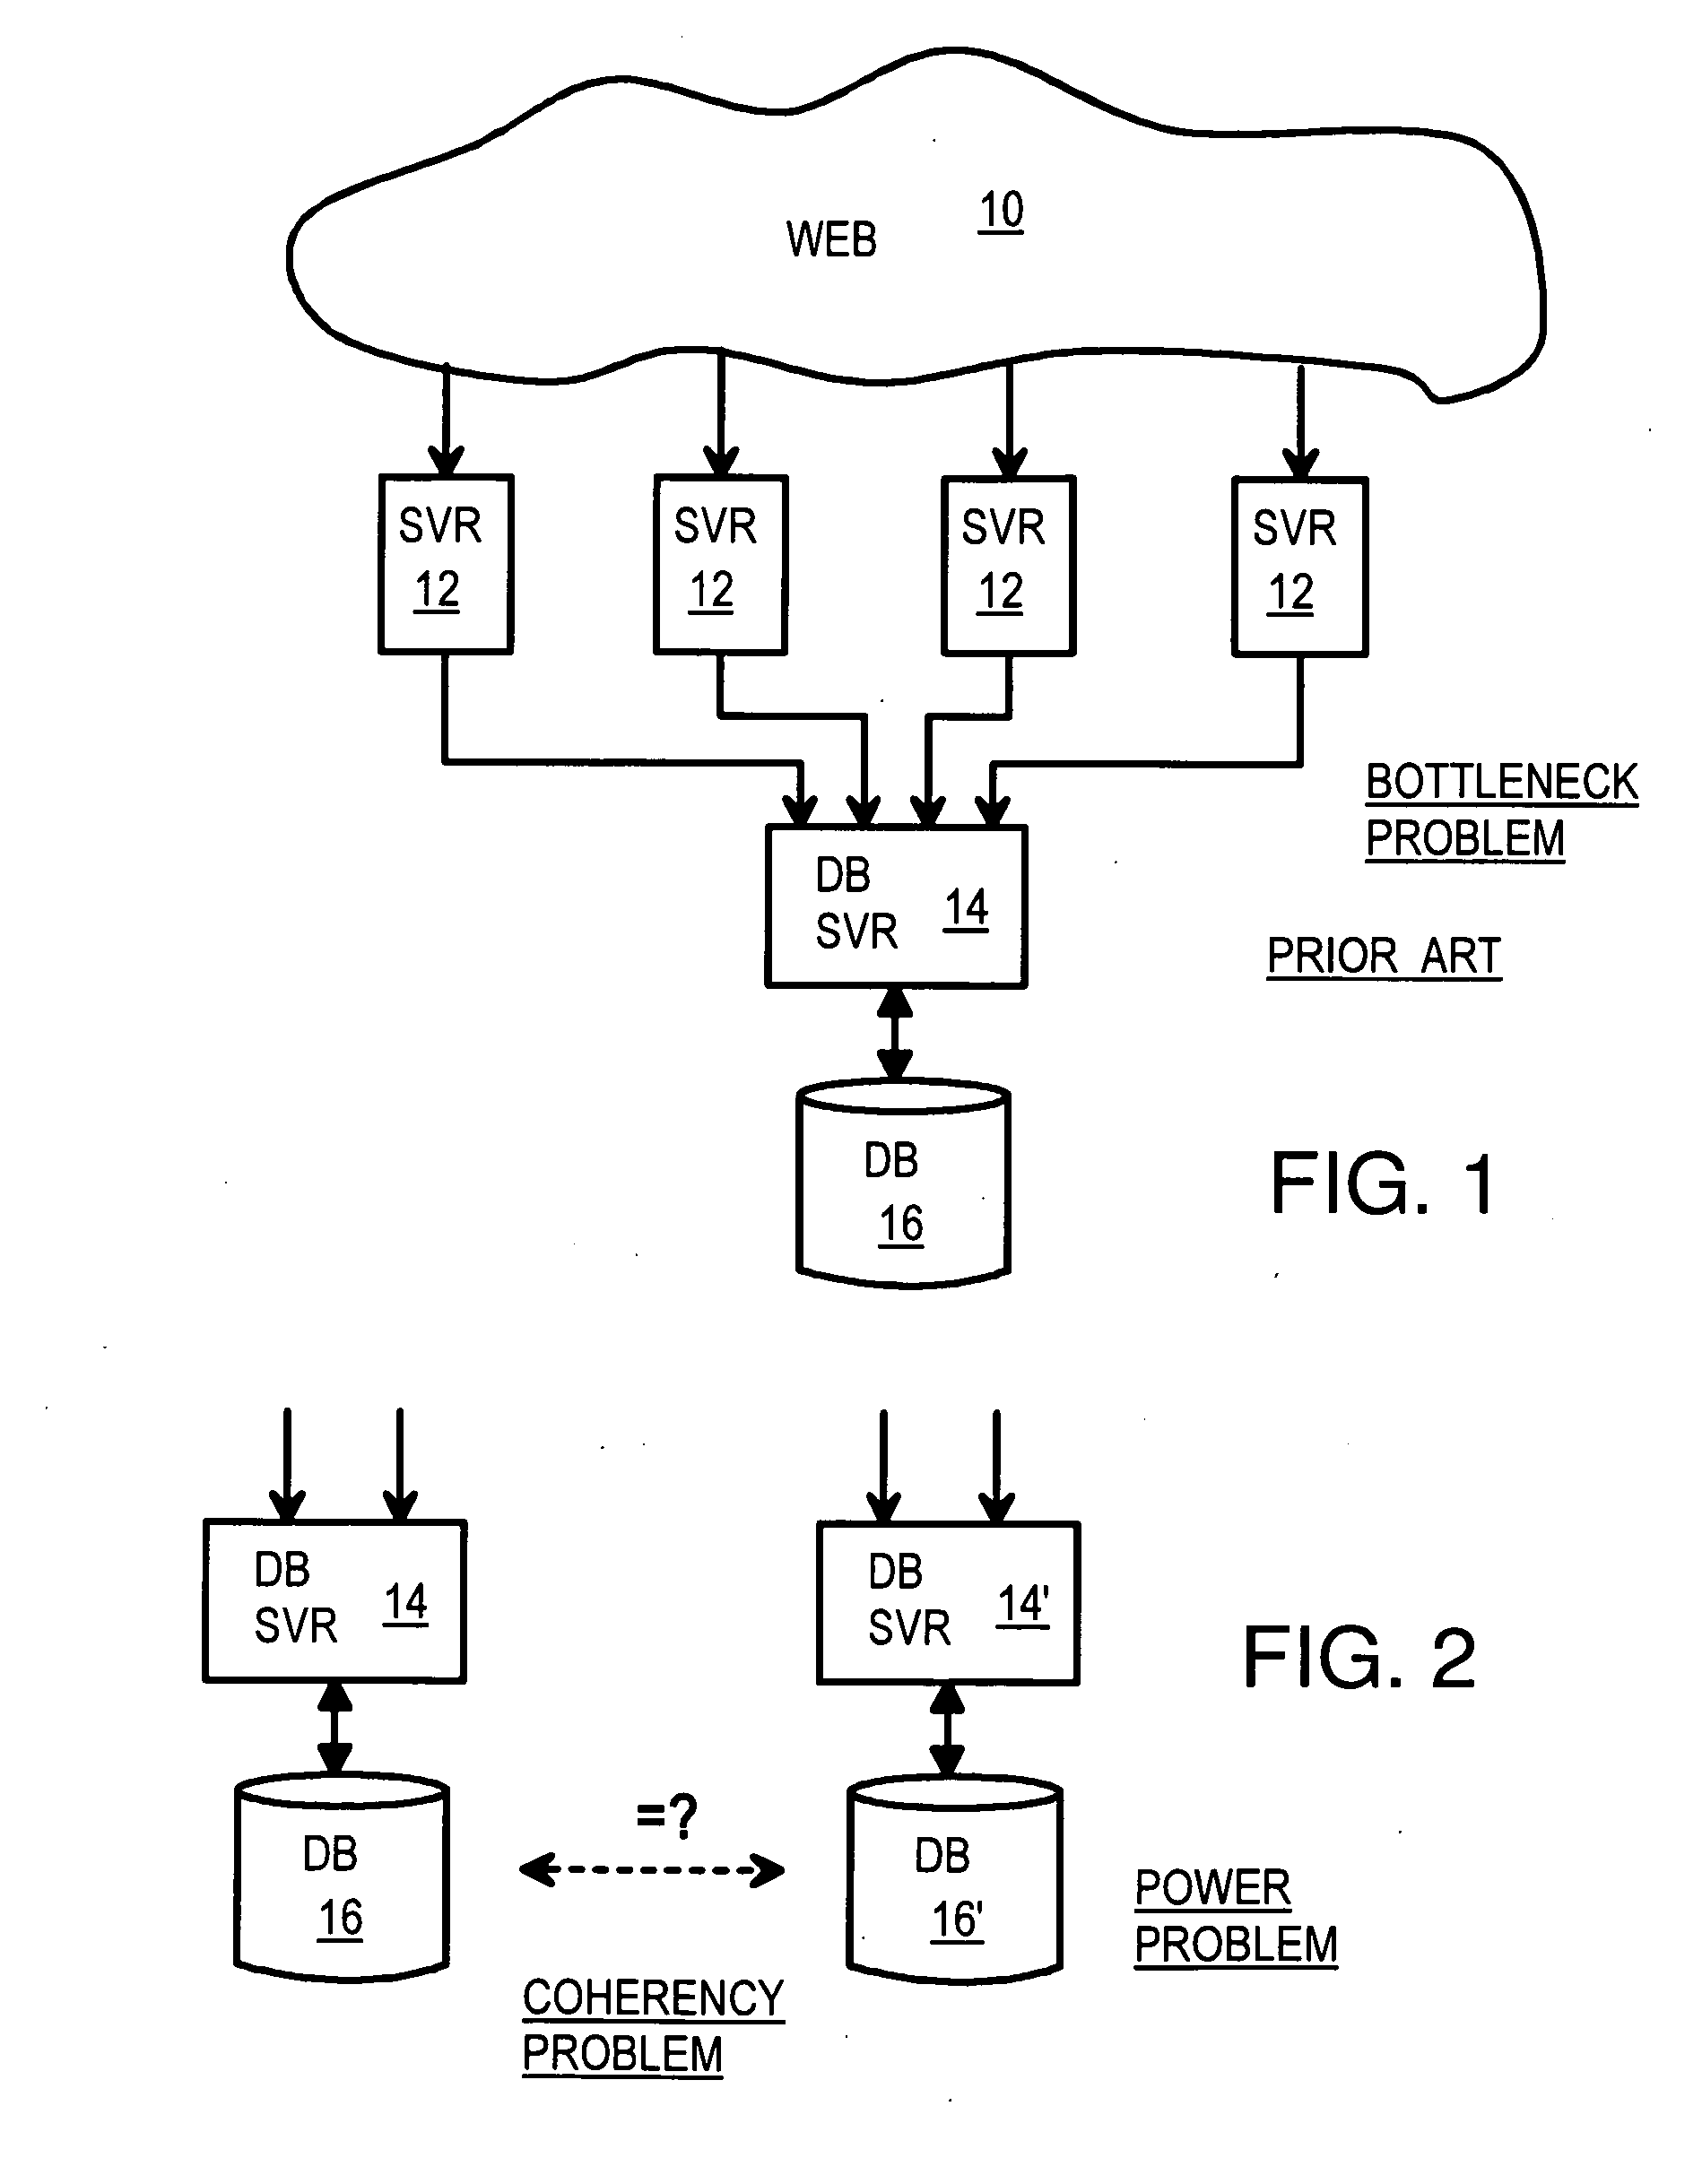 Sharing Data Fabric for Coherent-Distributed Caching of Multi-Node Shared-Distributed Flash Memory